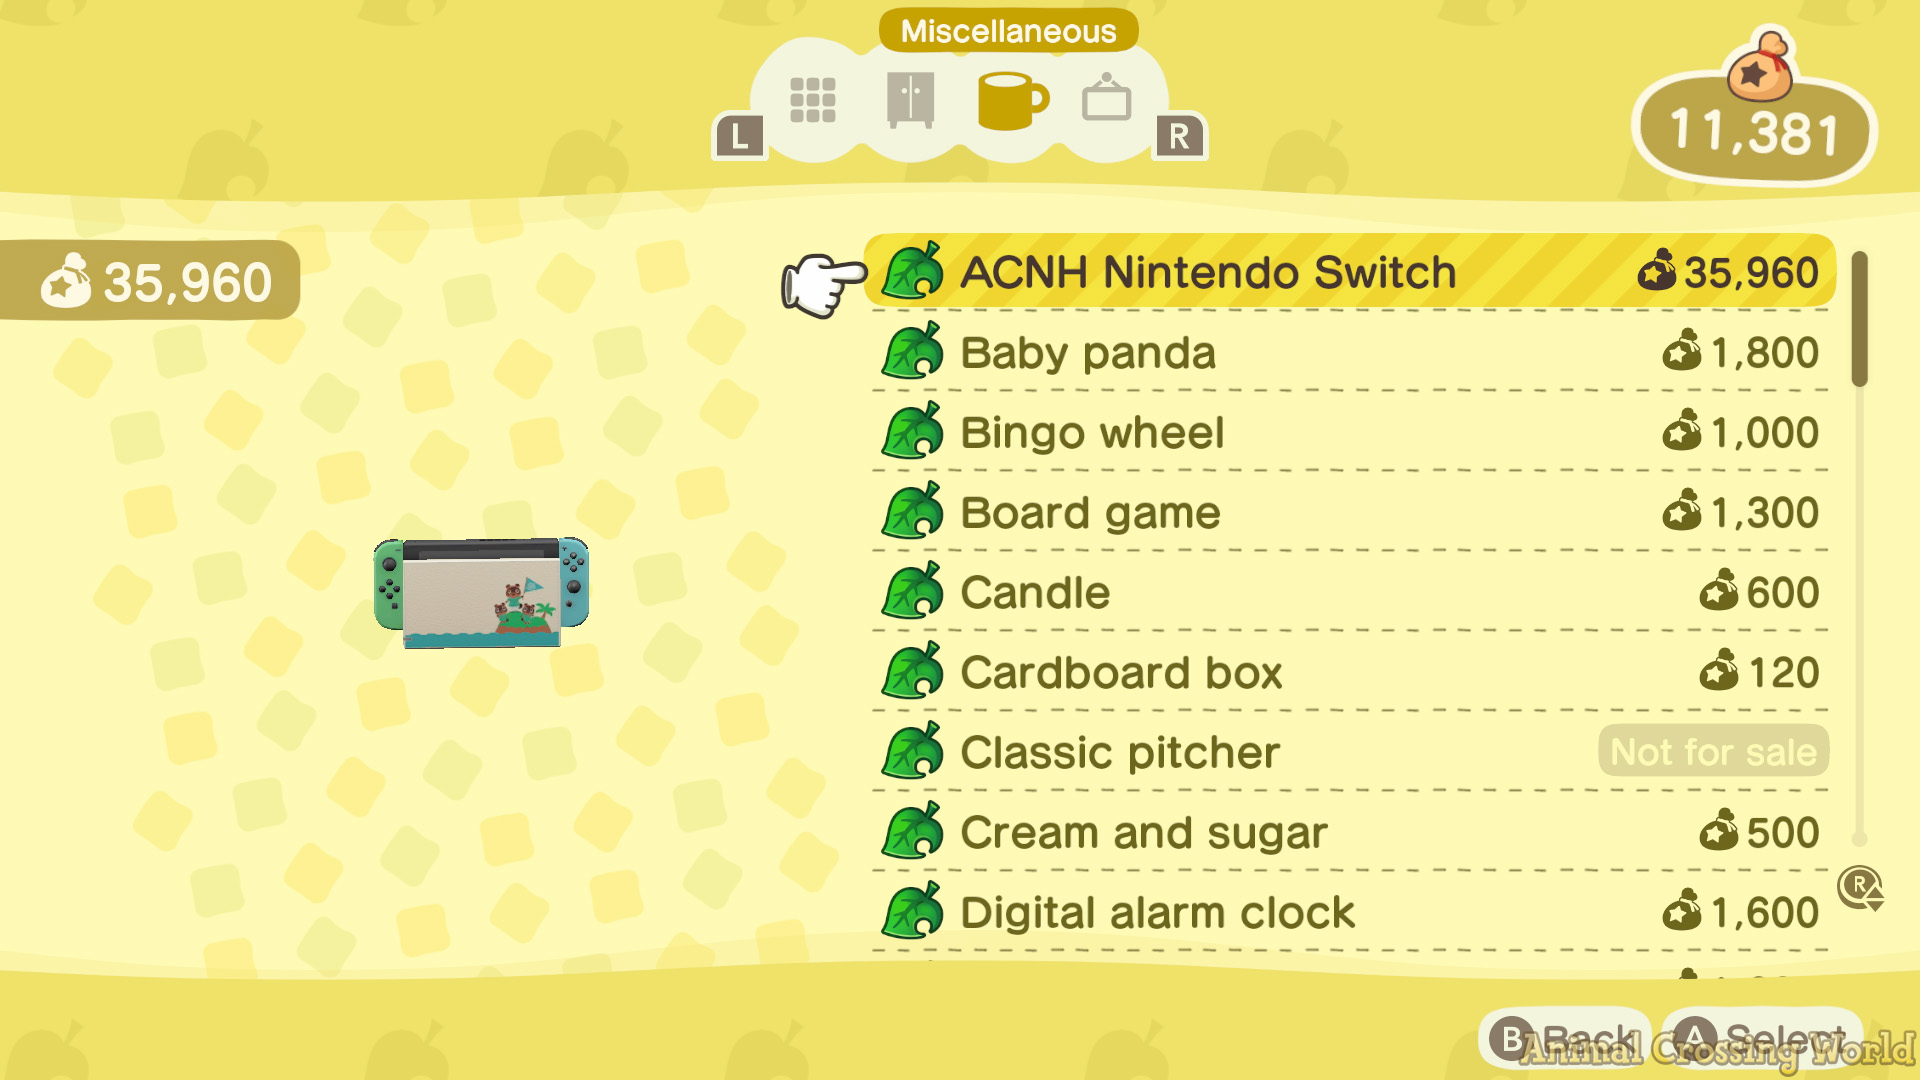 How To Upgrade Increase Your Inventory Space In Animal Crossing New Horizons